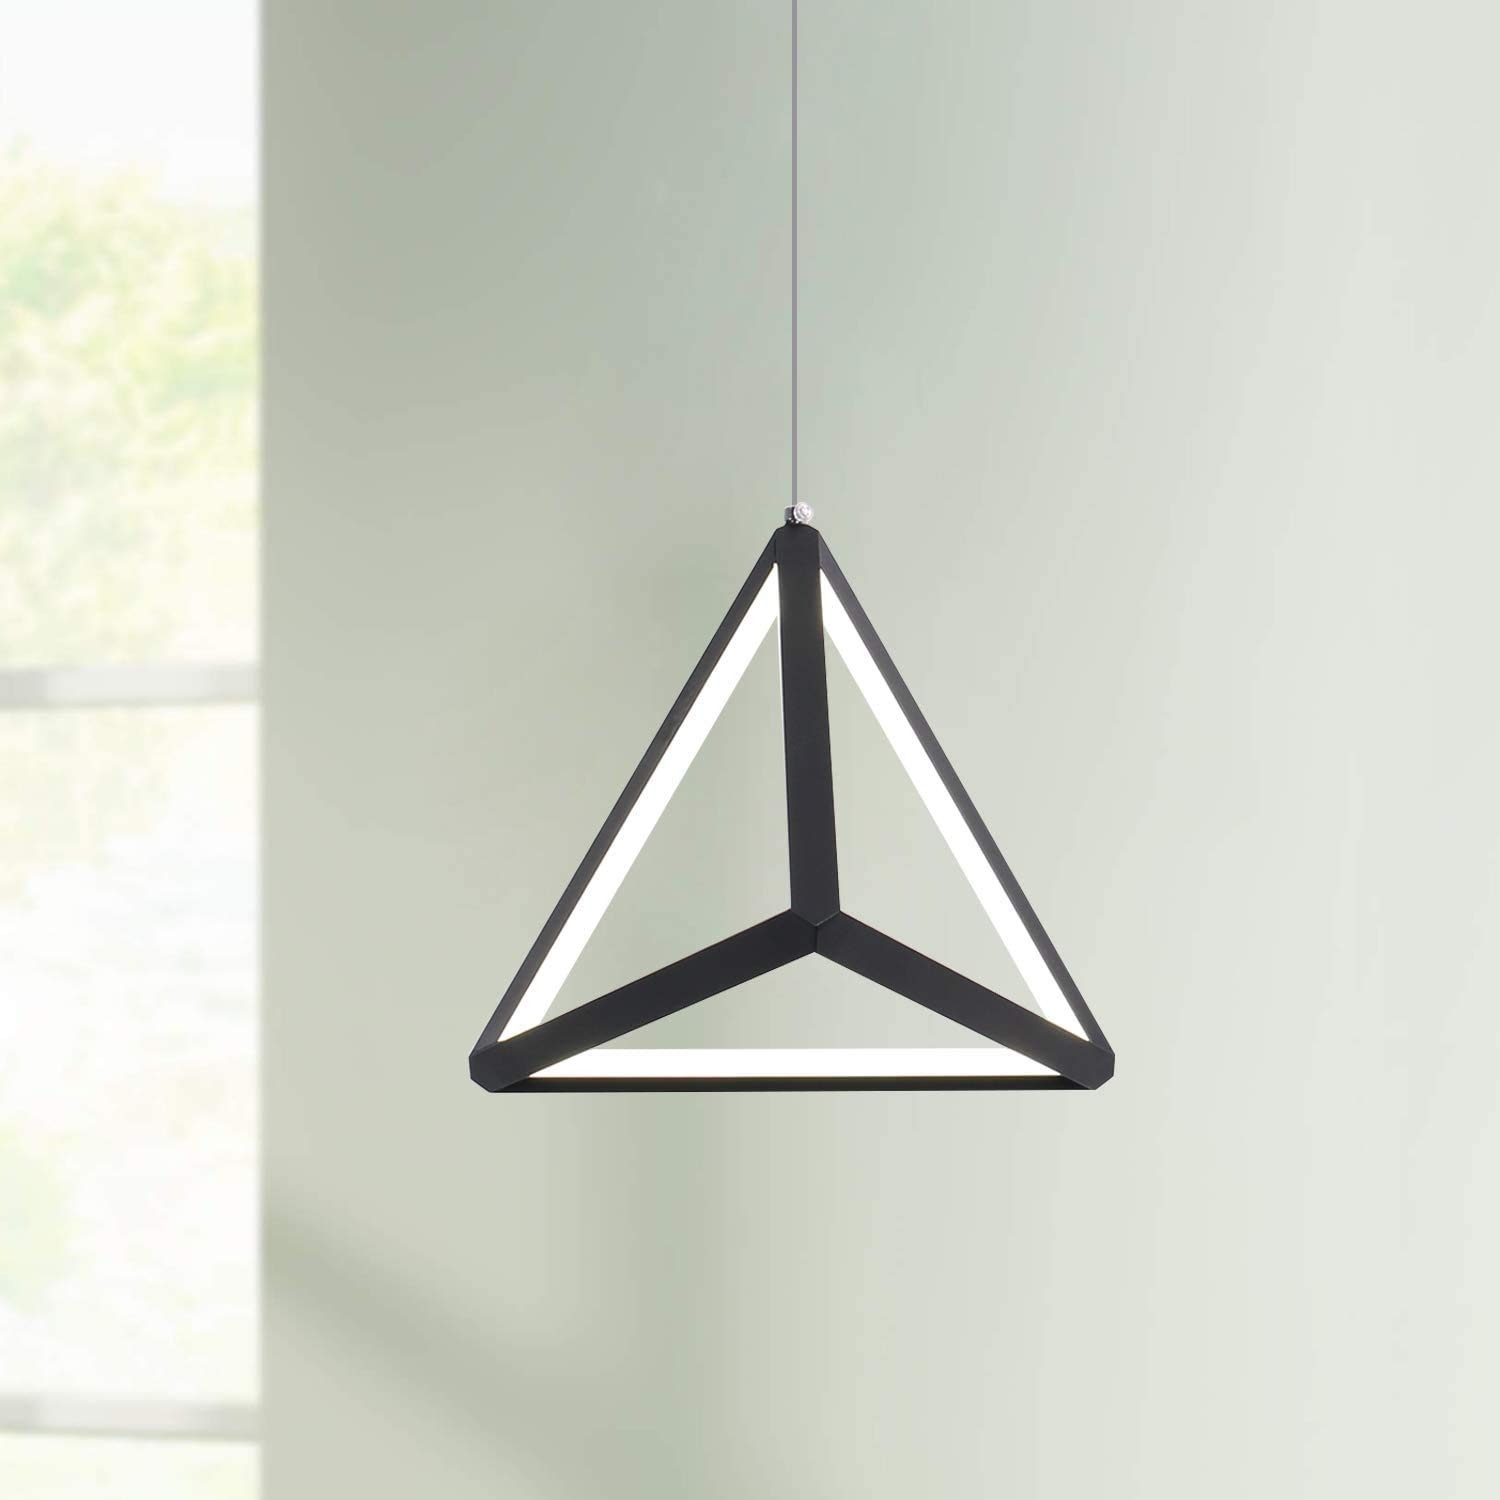 N-Lighten Triangle Ceiling Lamps Modern LED Chandeliers Pendant Hanging